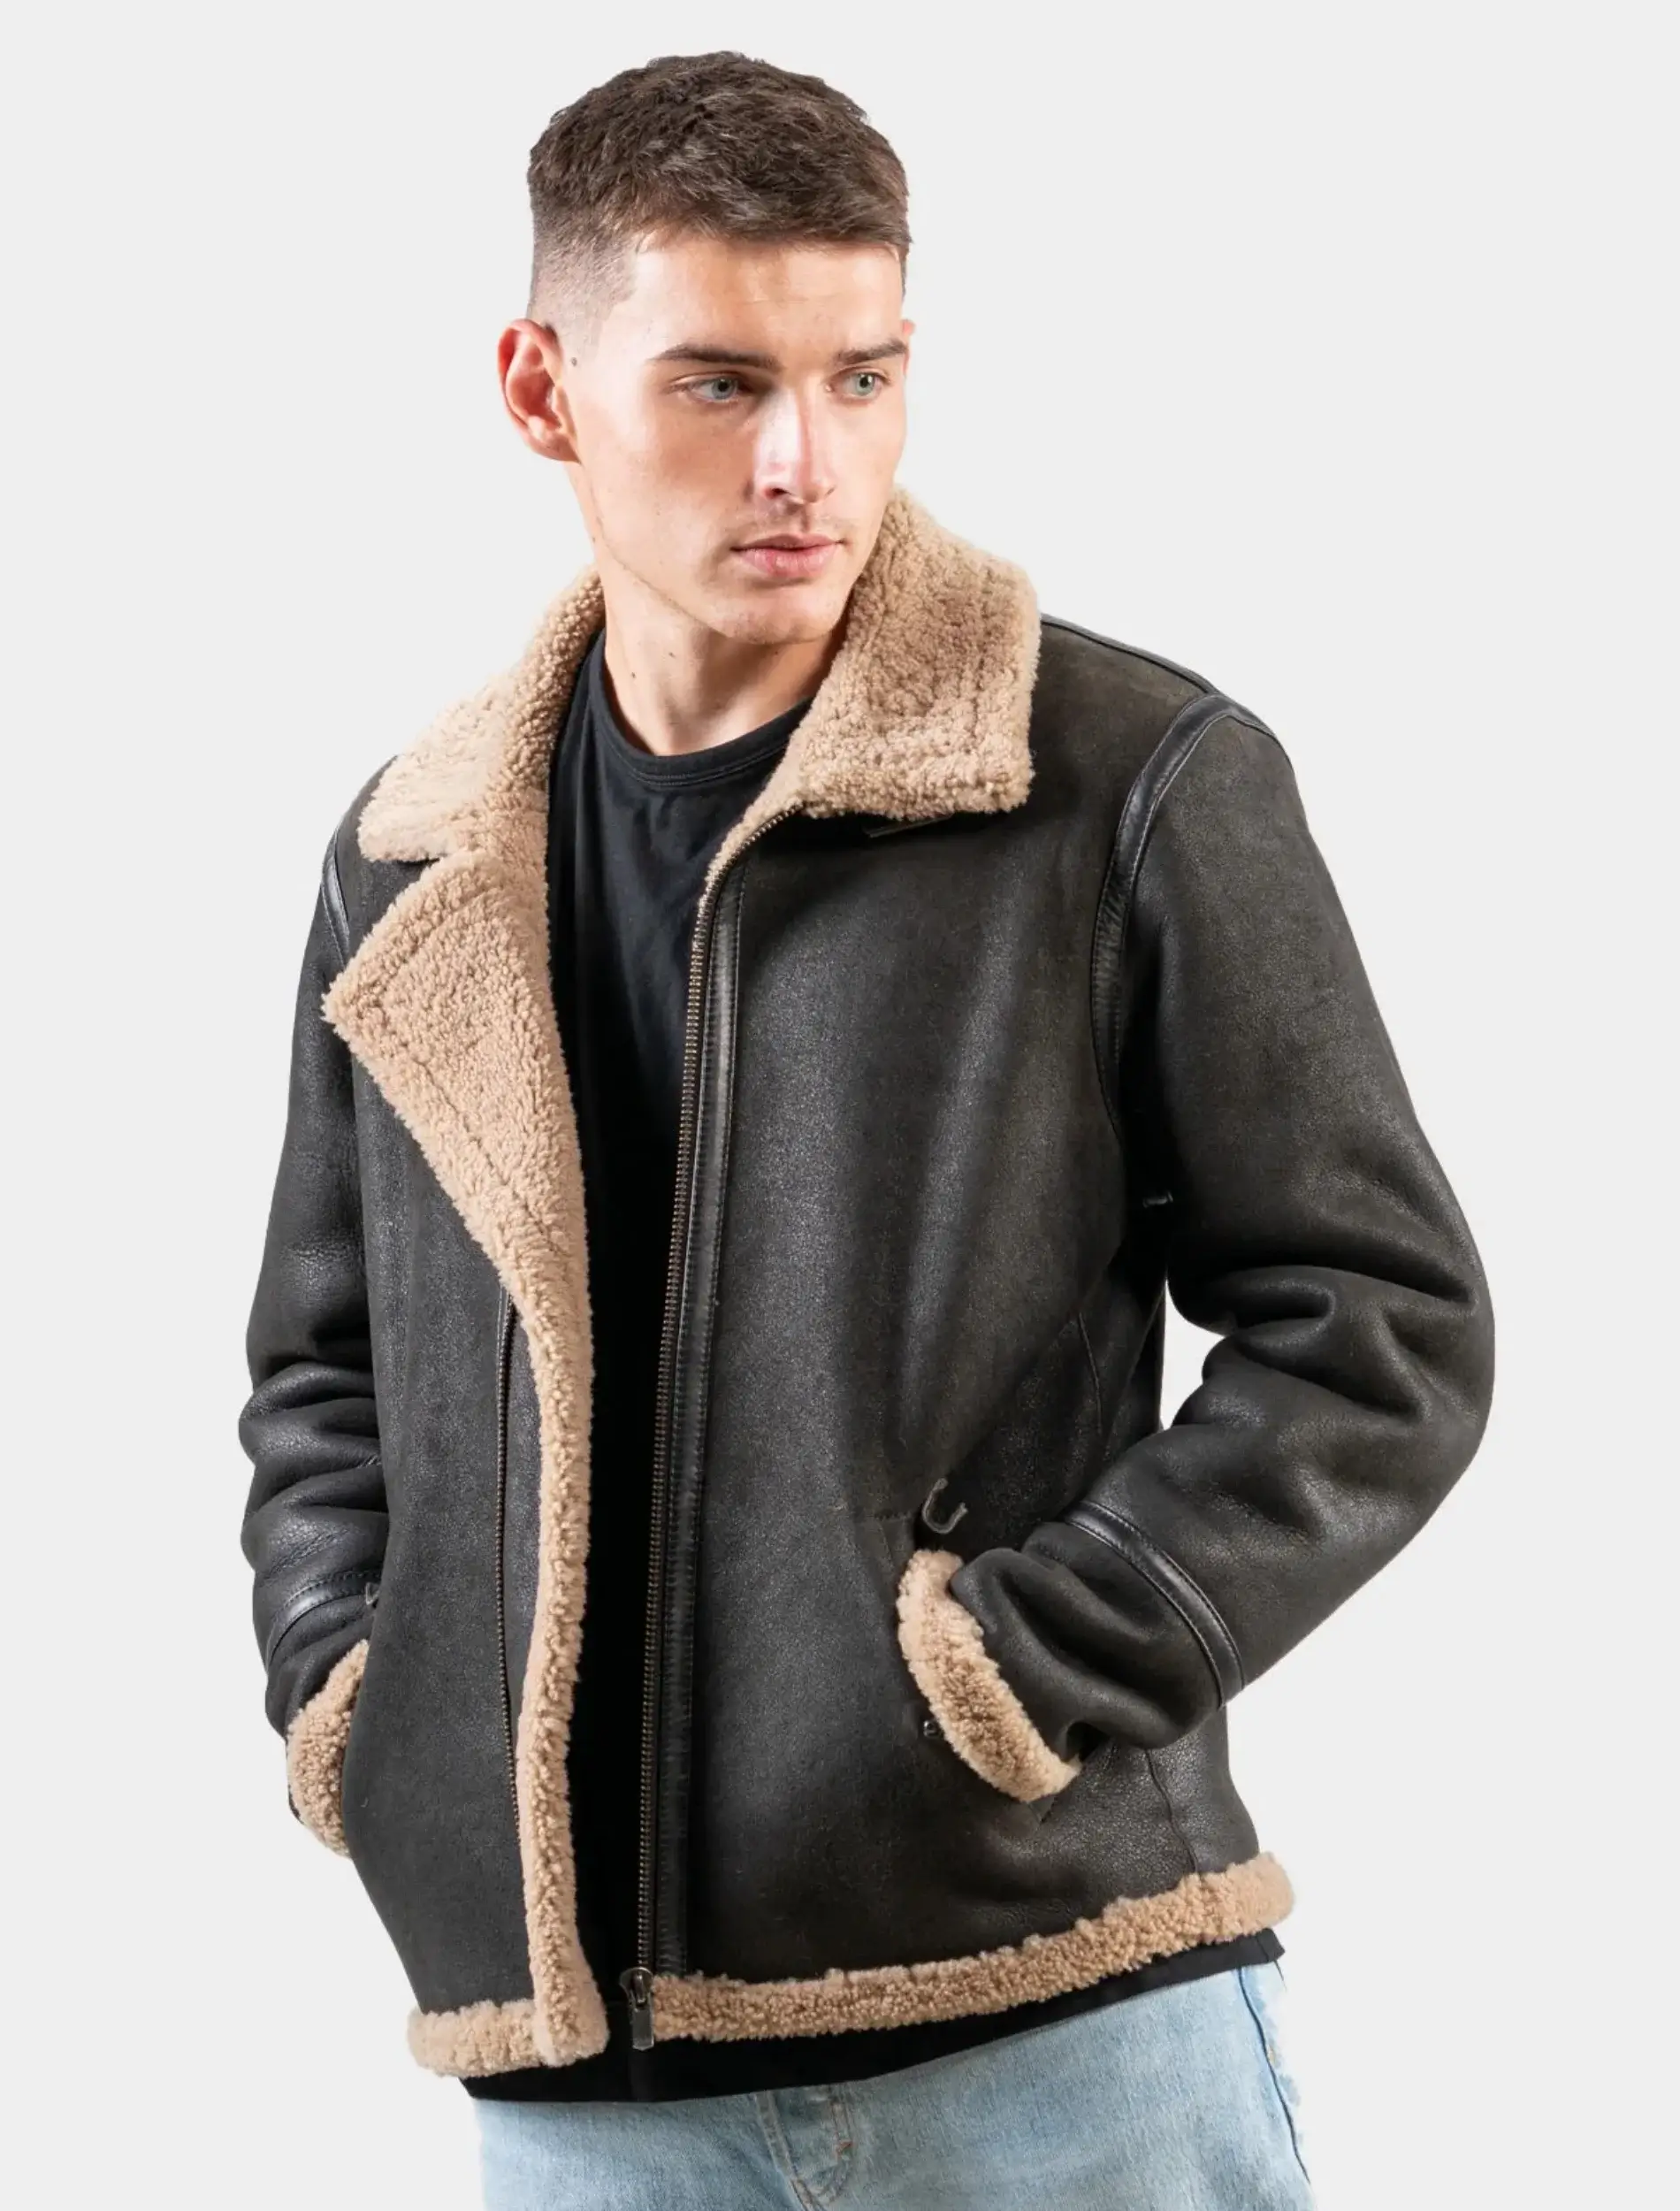 Men's Classic Dark Brown Leather Shearling Jacket